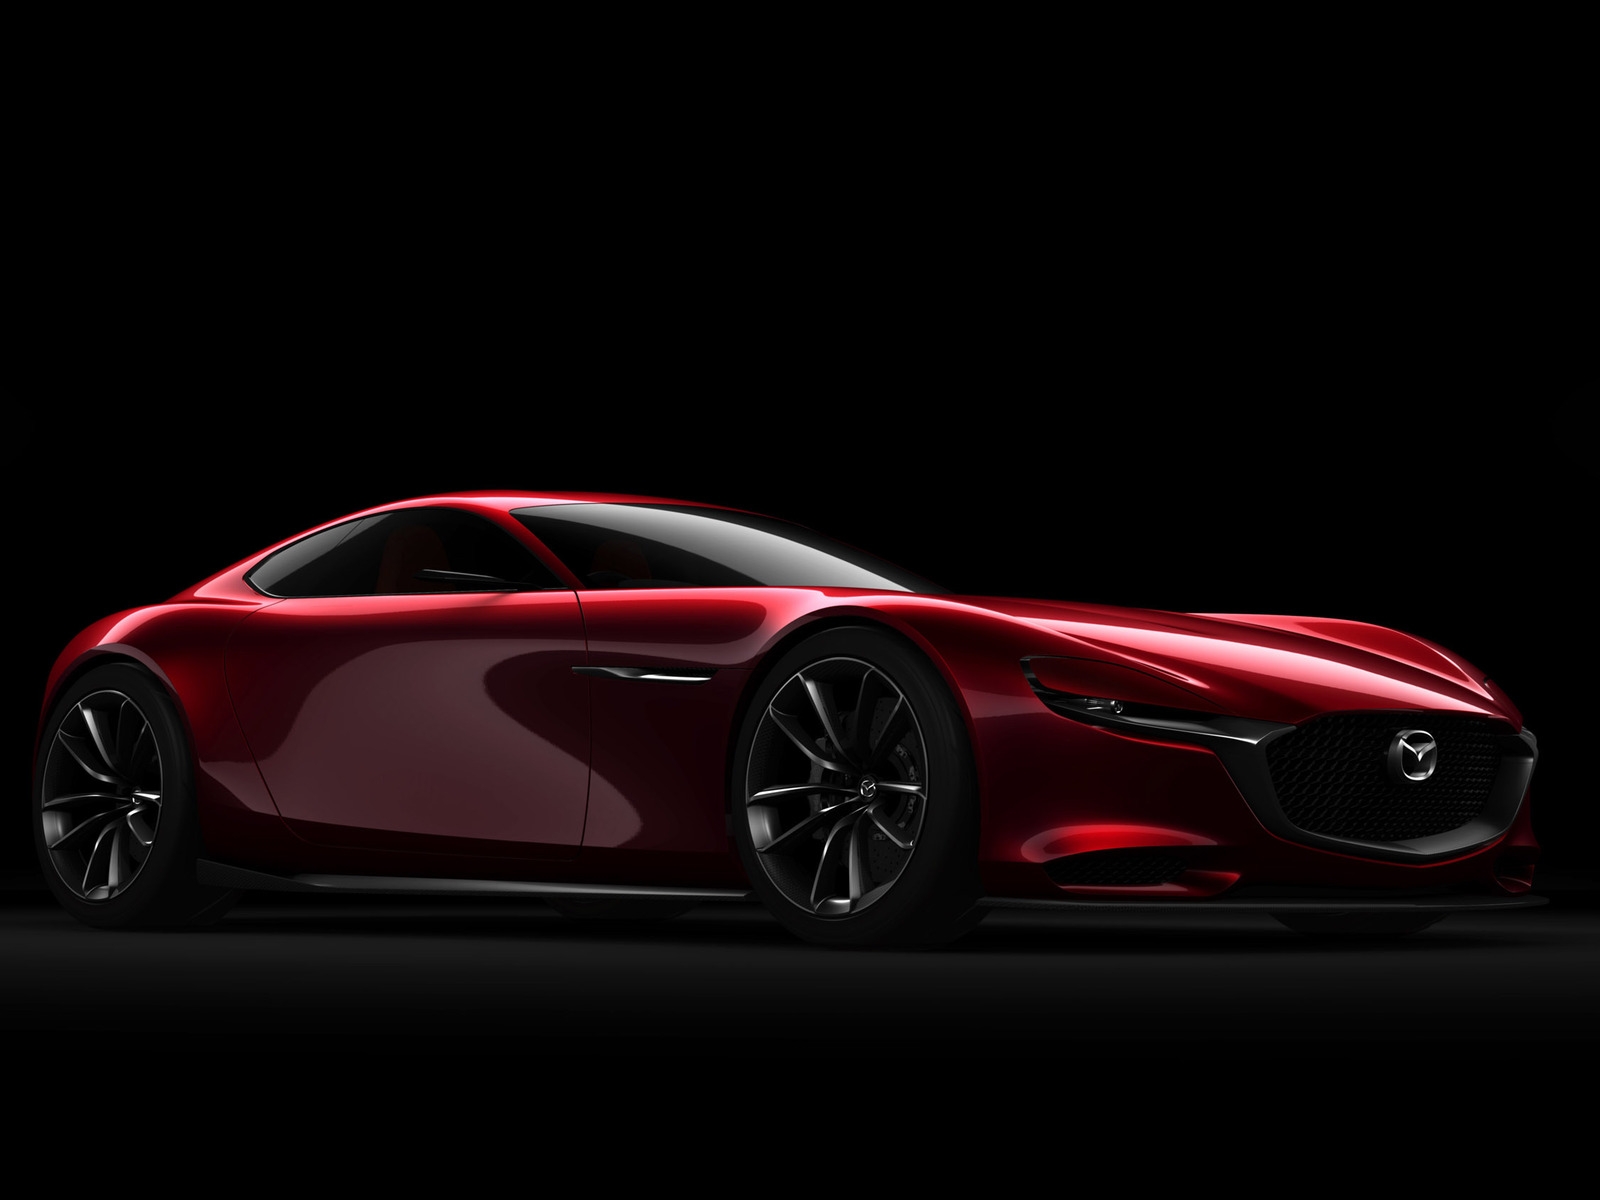 2015 Mazda RX Vision Concept for 1600 x 1200 resolution